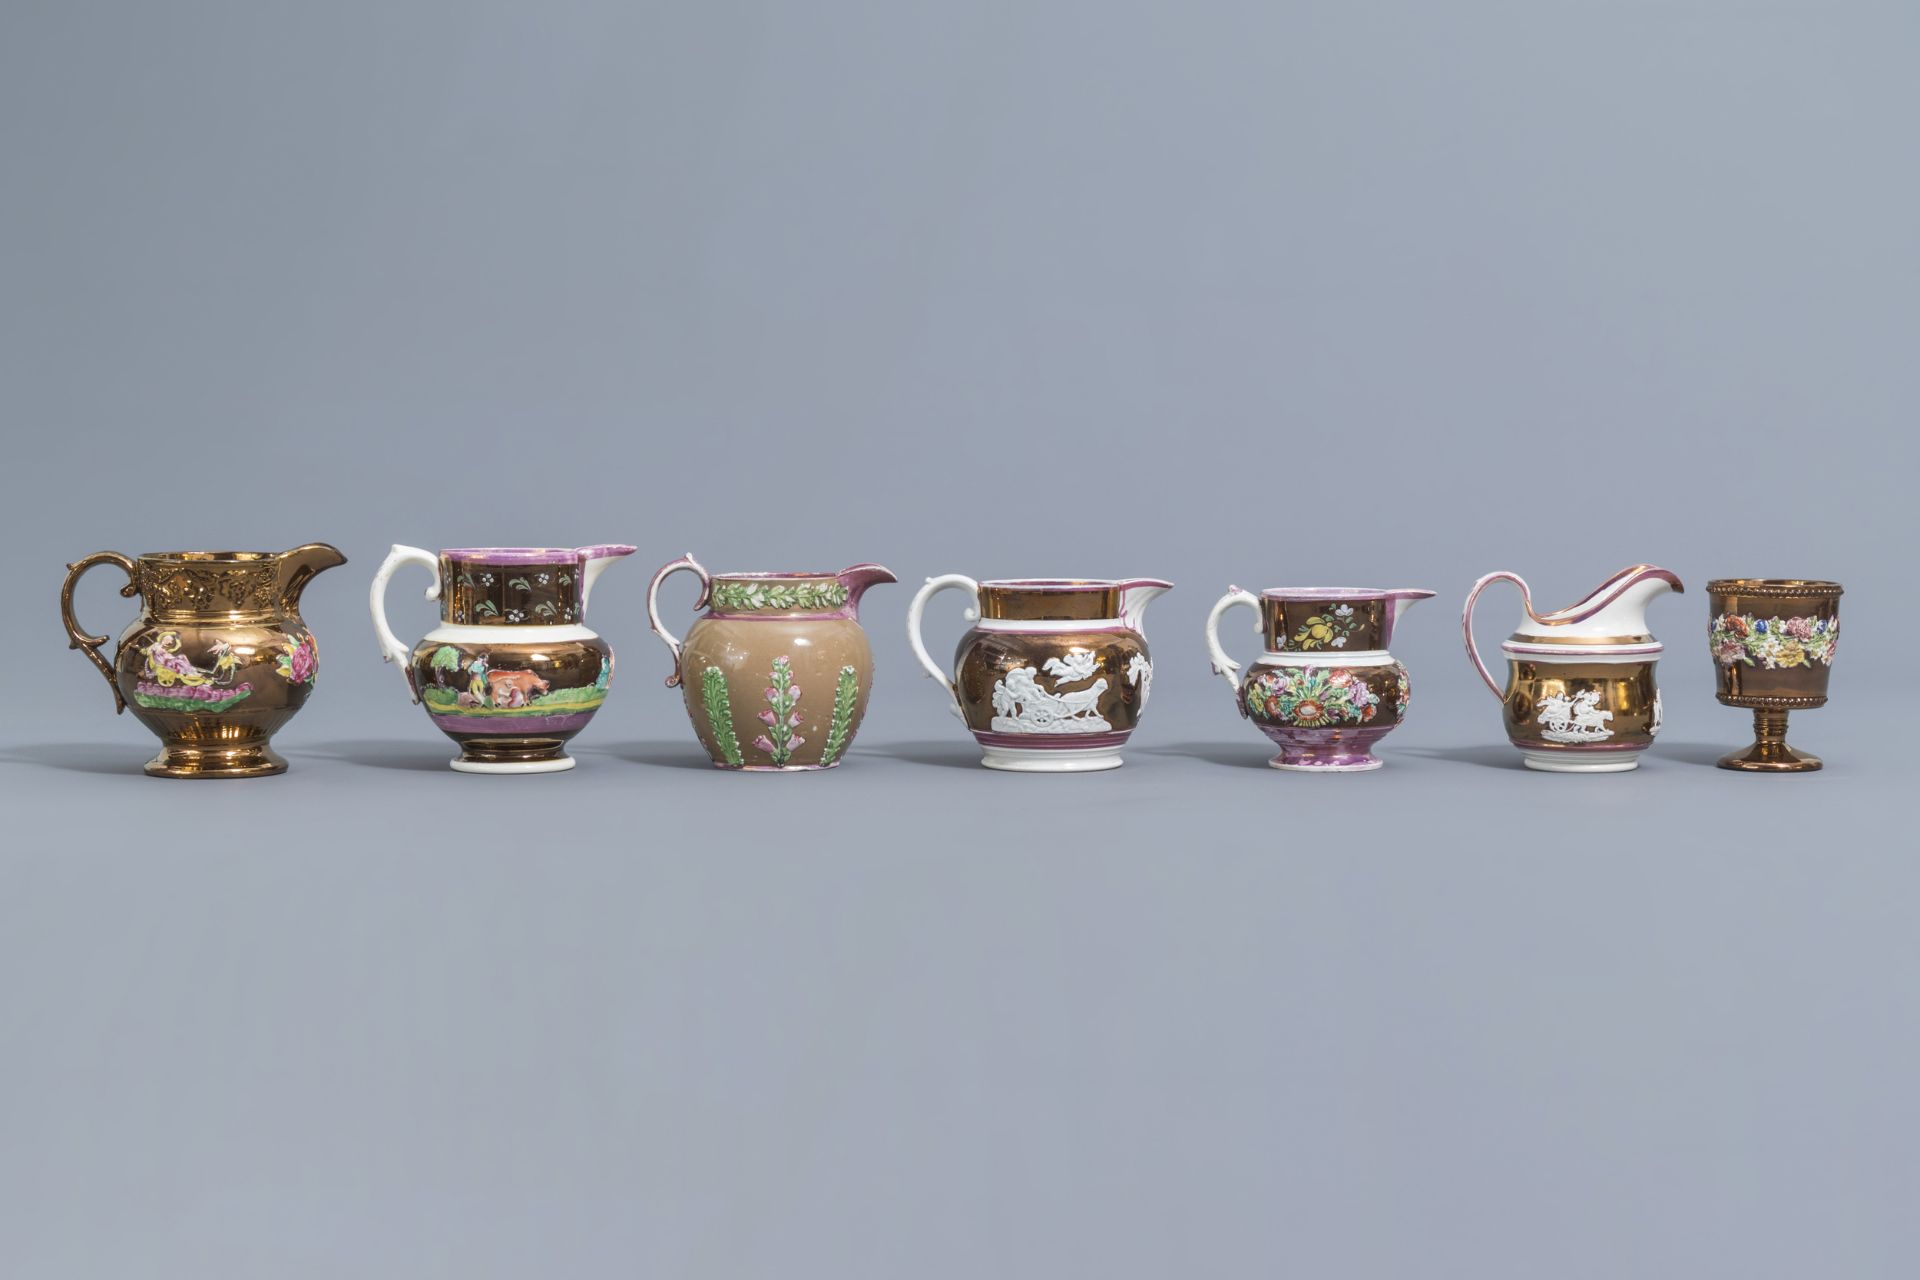 A varied collection of English lustreware items with relief design, 19th C. - Image 28 of 50